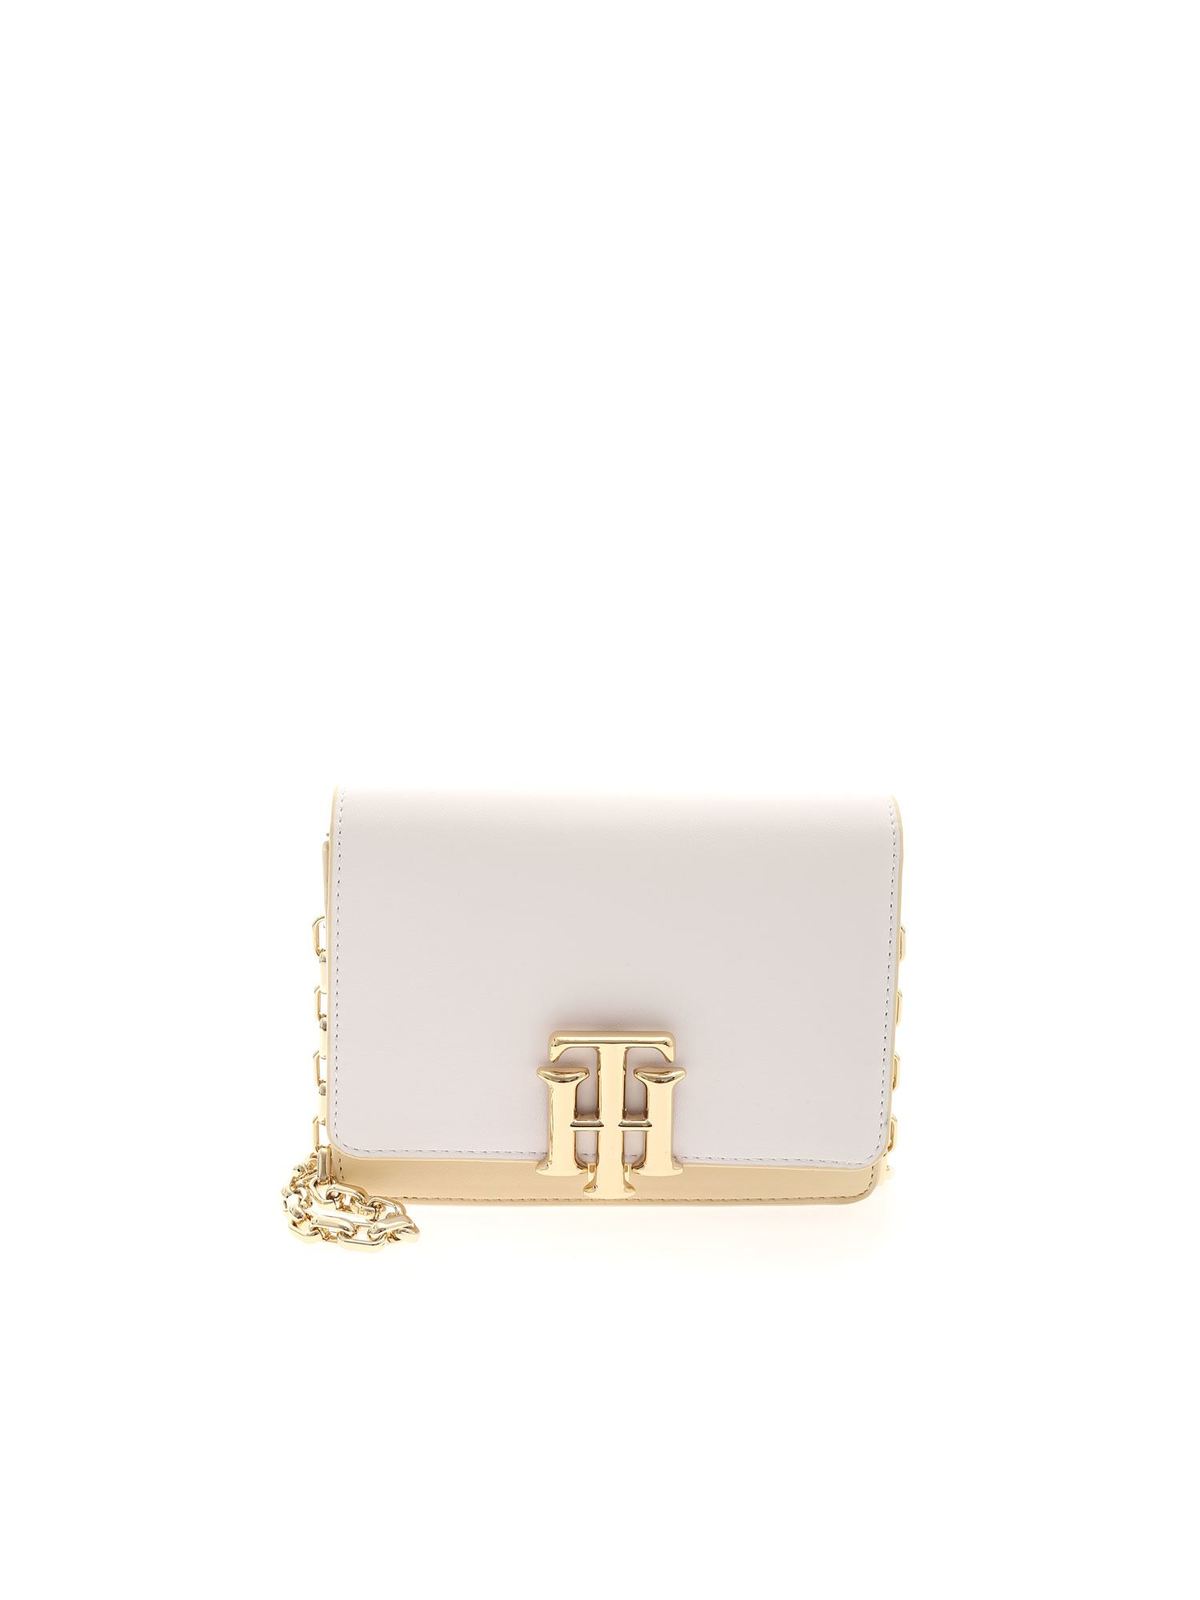 God kiezen Metafoor Cross body bags Tommy Hilfiger - The Lock Mini bag in white and cream color  - AW0AW09654ACK